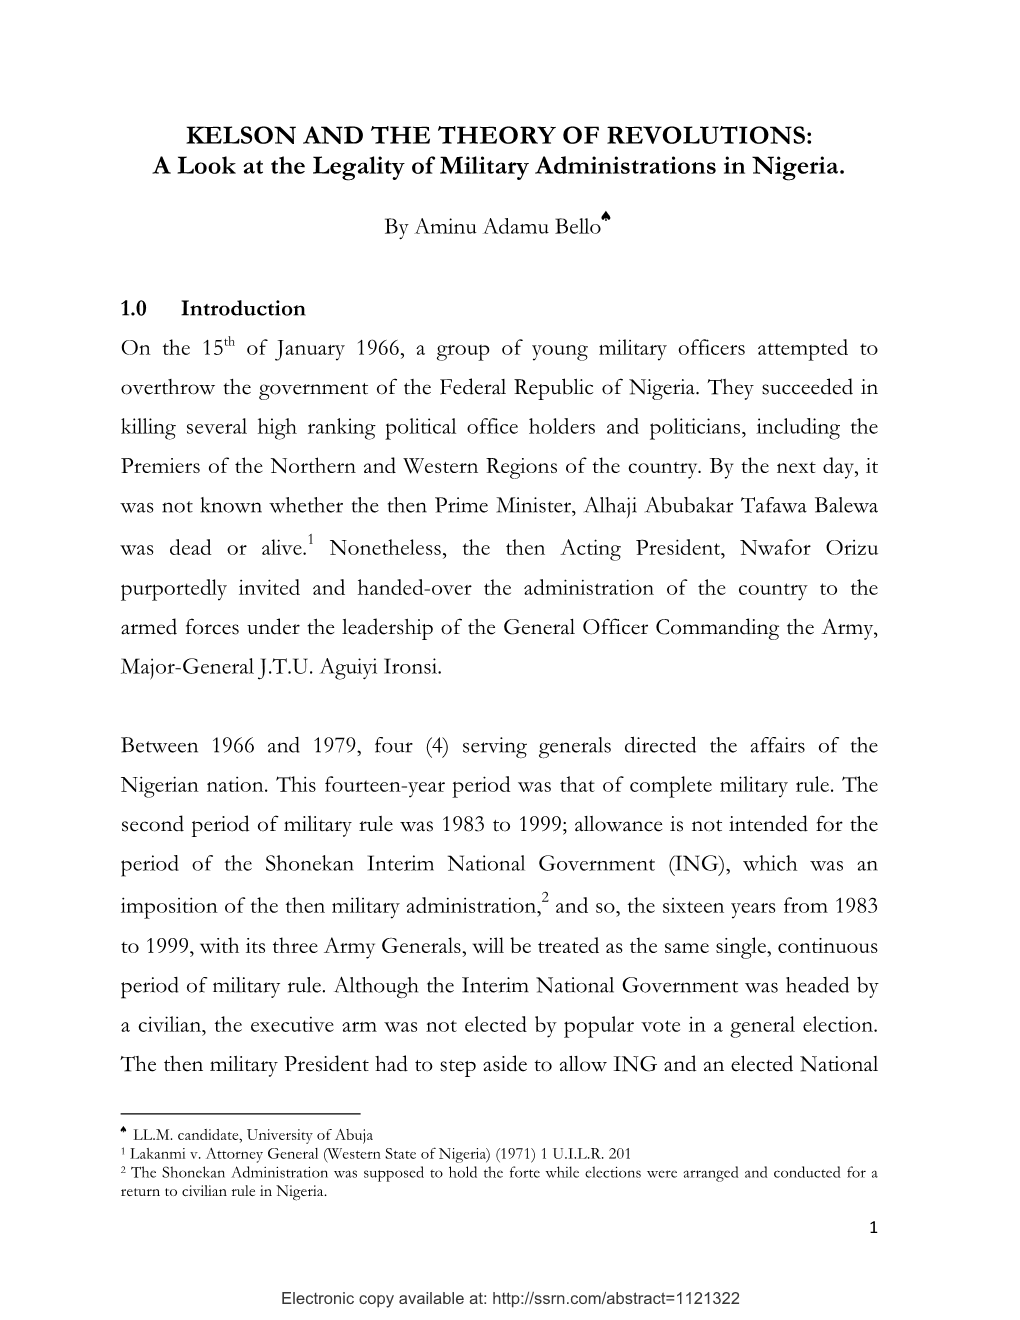 A Look at the Legality of Military Administrations in Nigeria